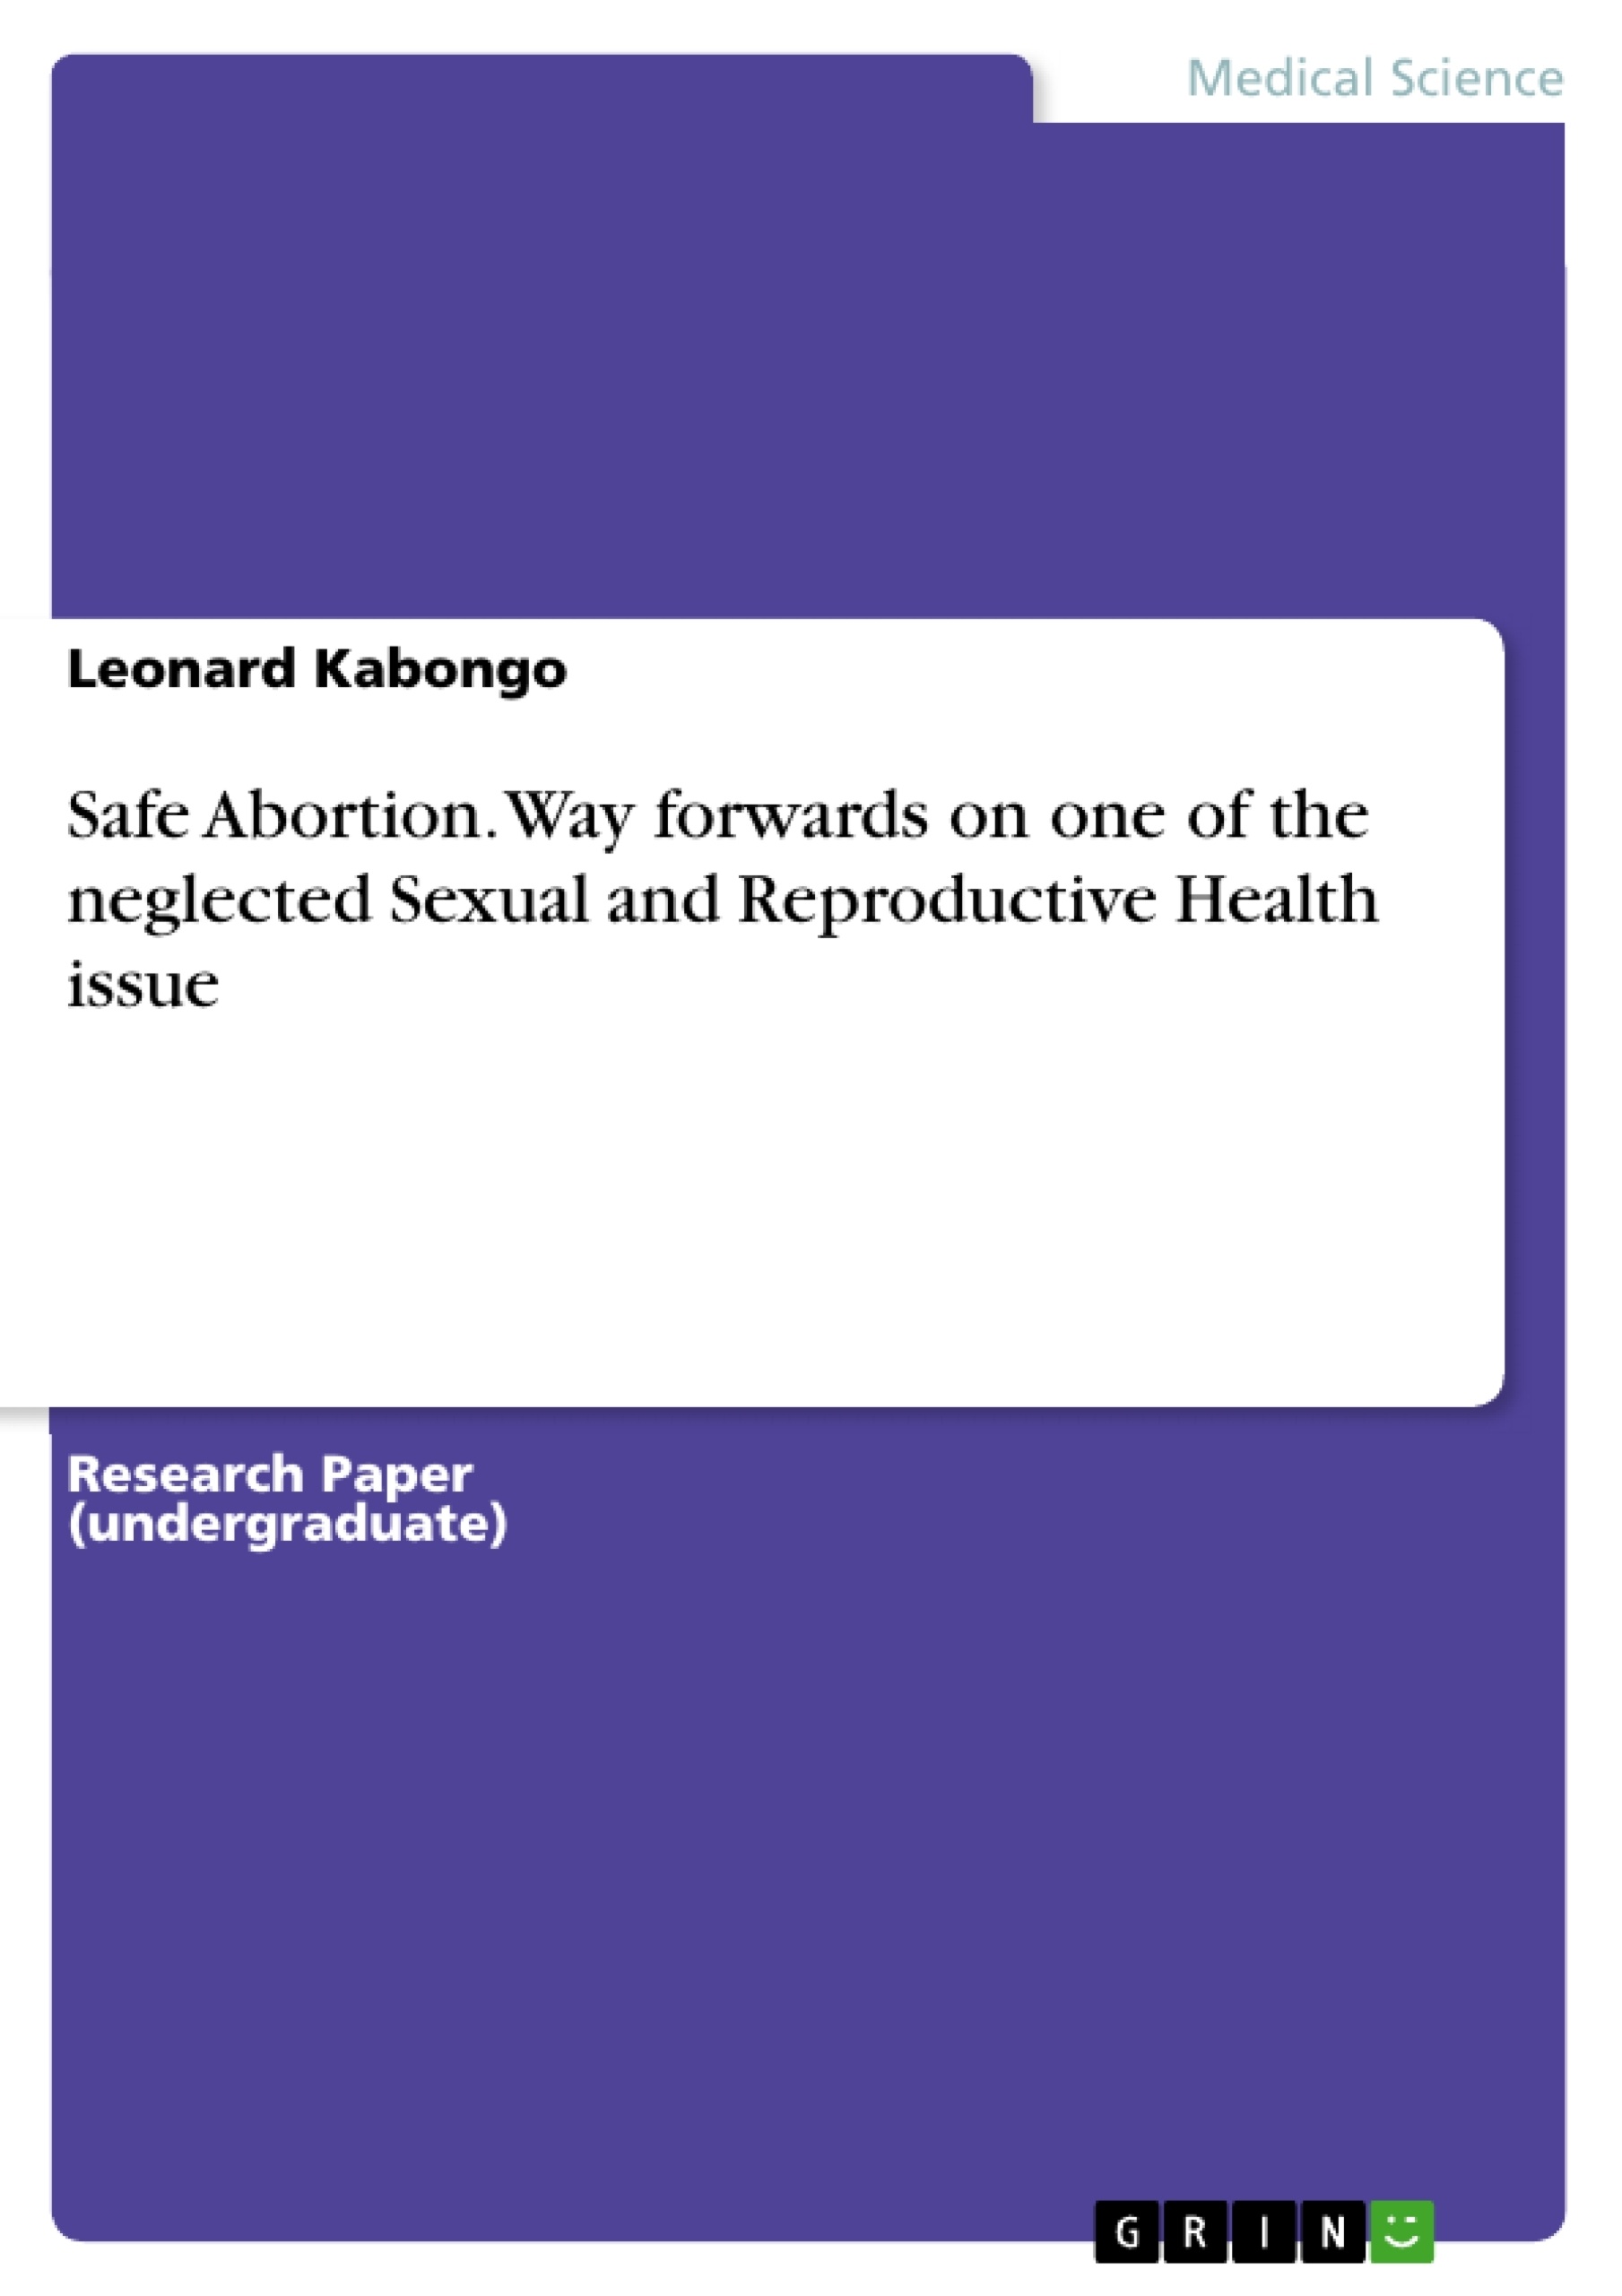 Titre: Safe Abortion. Way forwards on one of the neglected Sexual and Reproductive Health issue